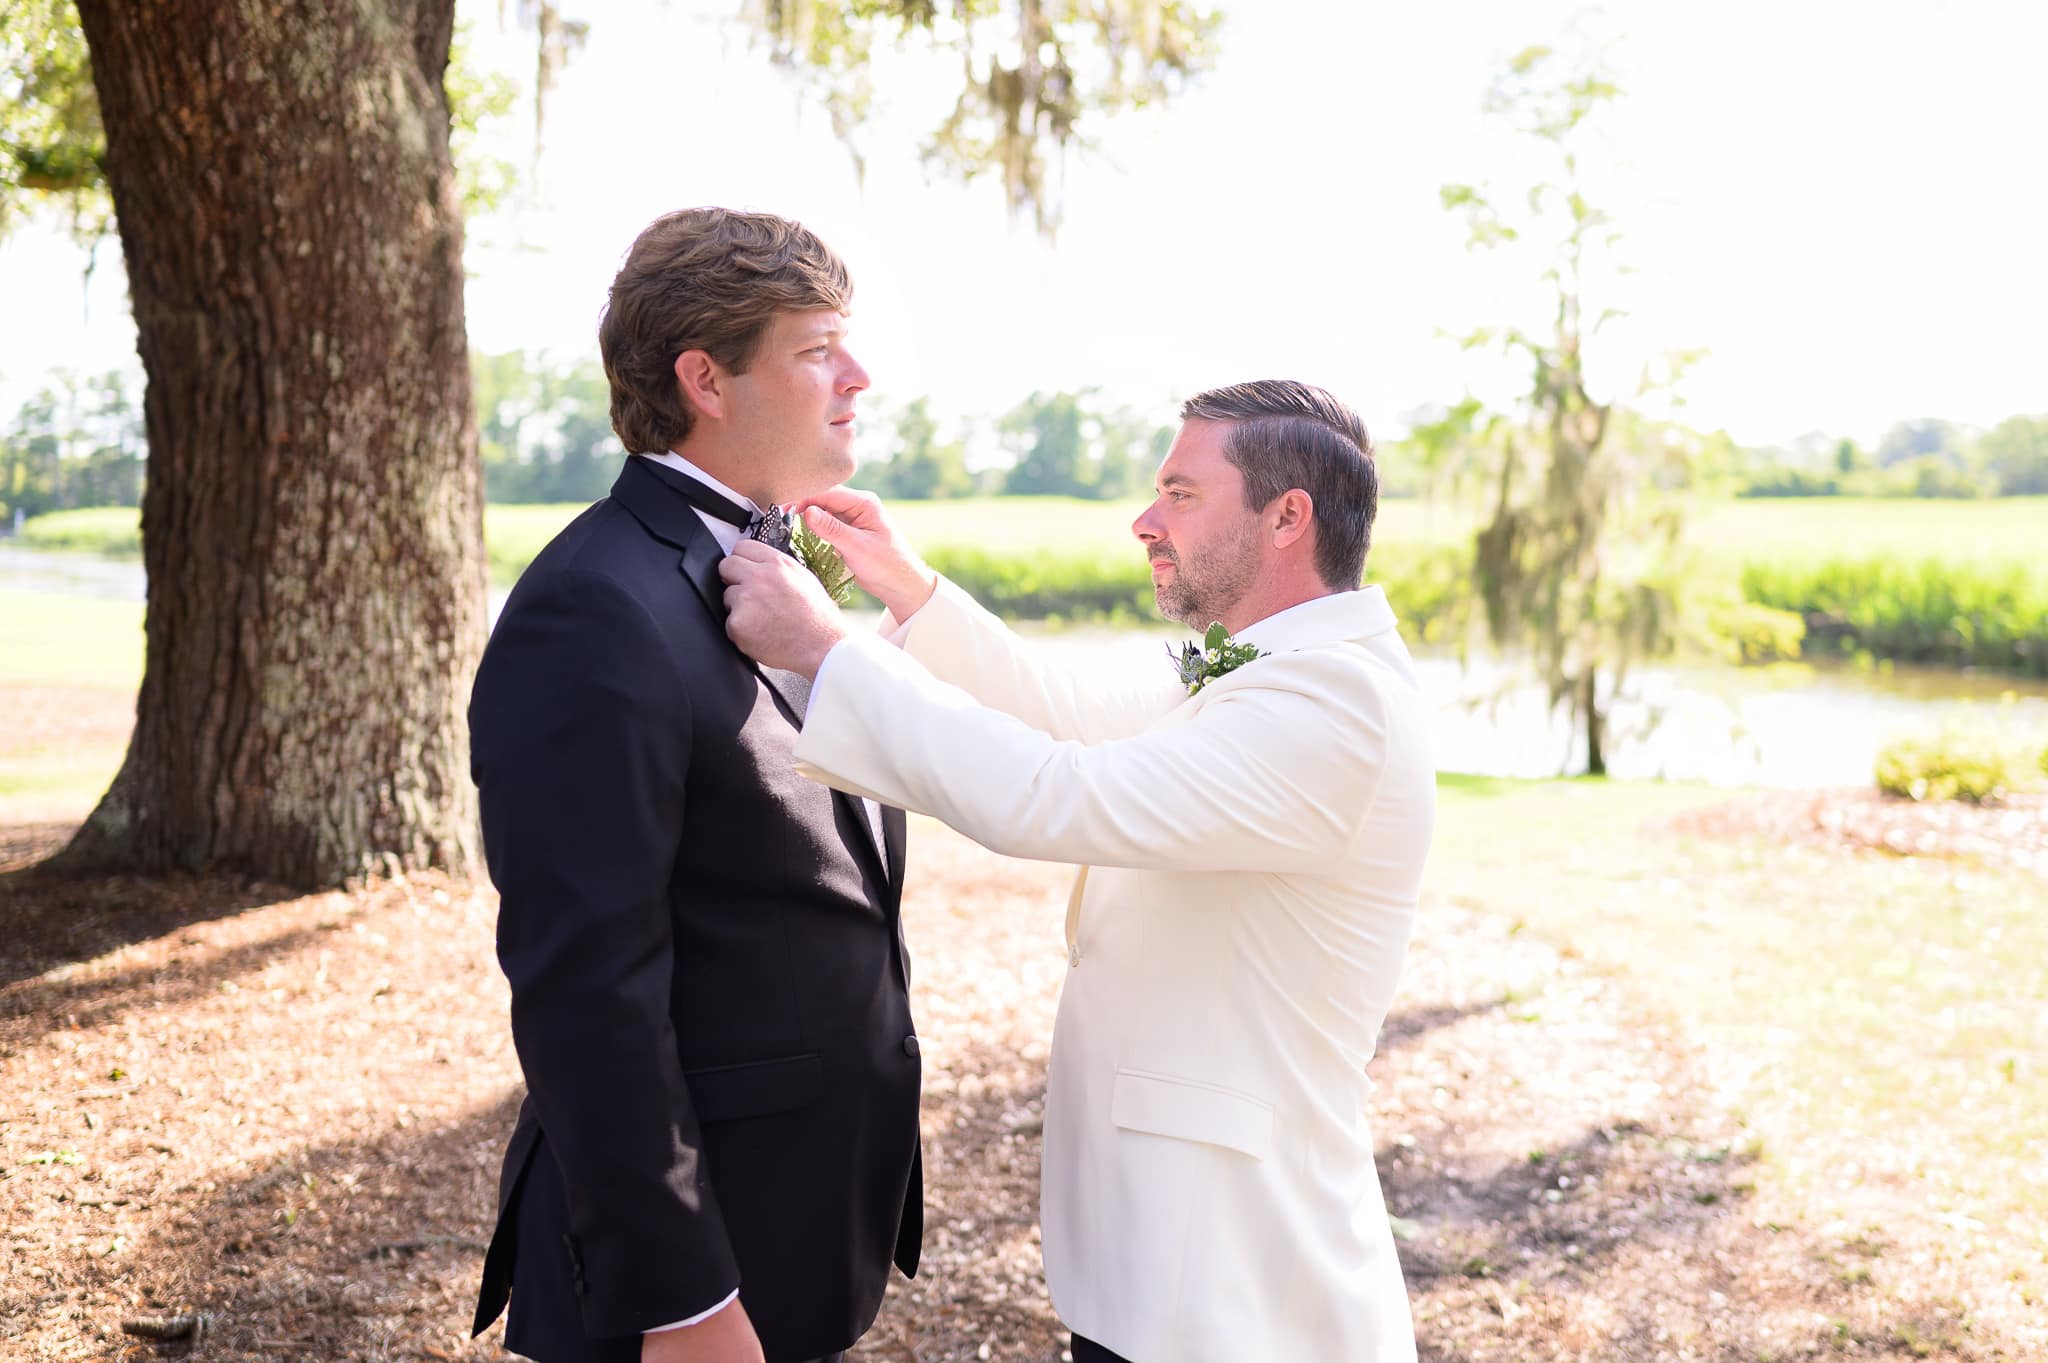 Groom helping best man with his tie - Caledonia Golf & Fish Club